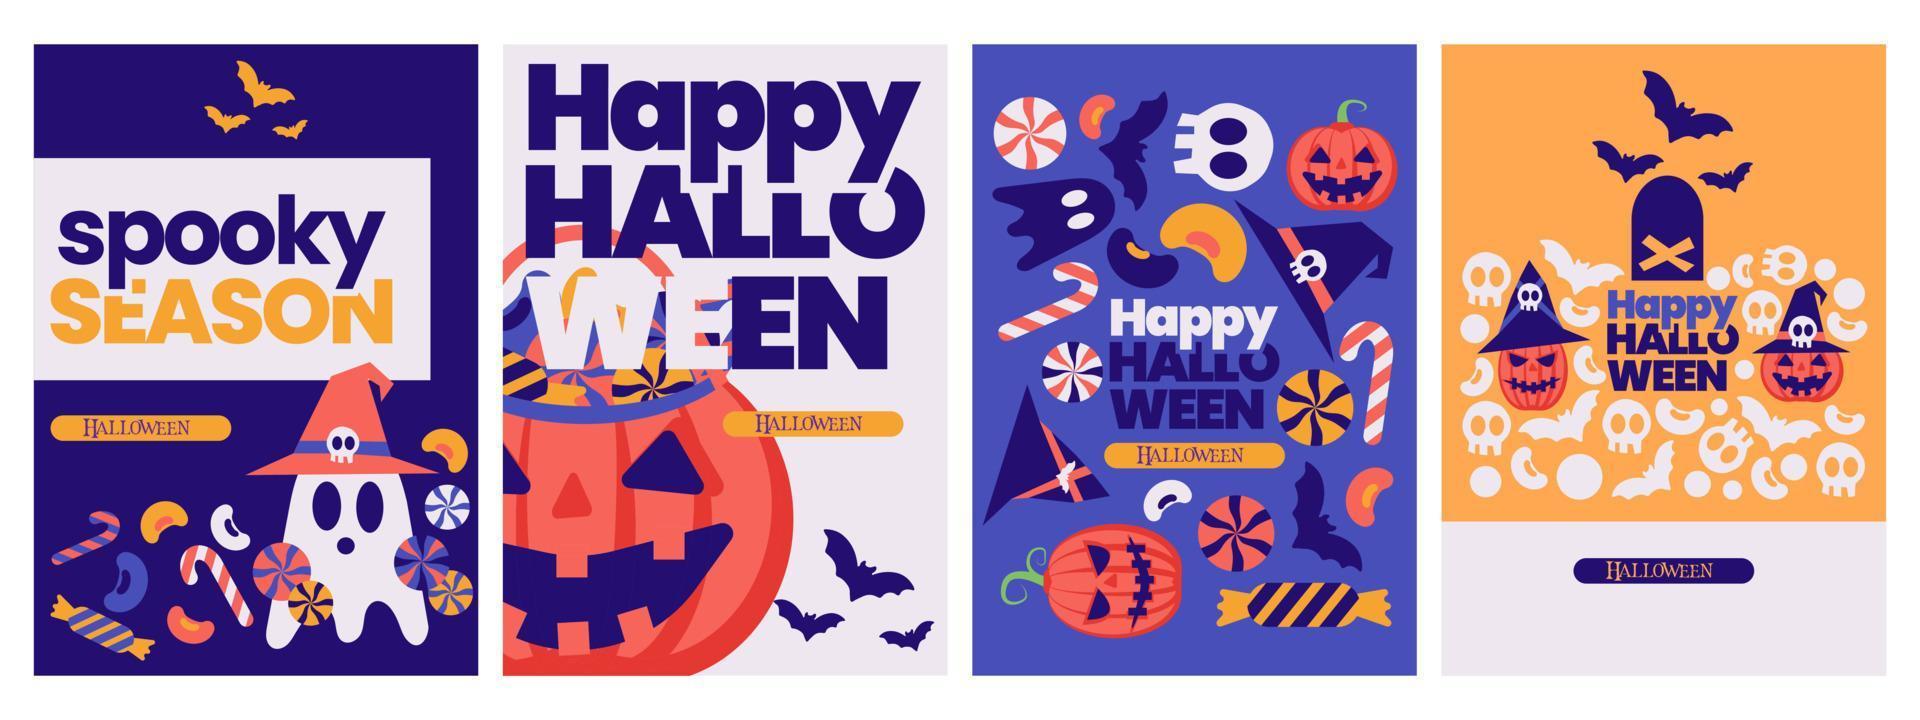 Simple geometric happy halloween set collection for invitation card vector